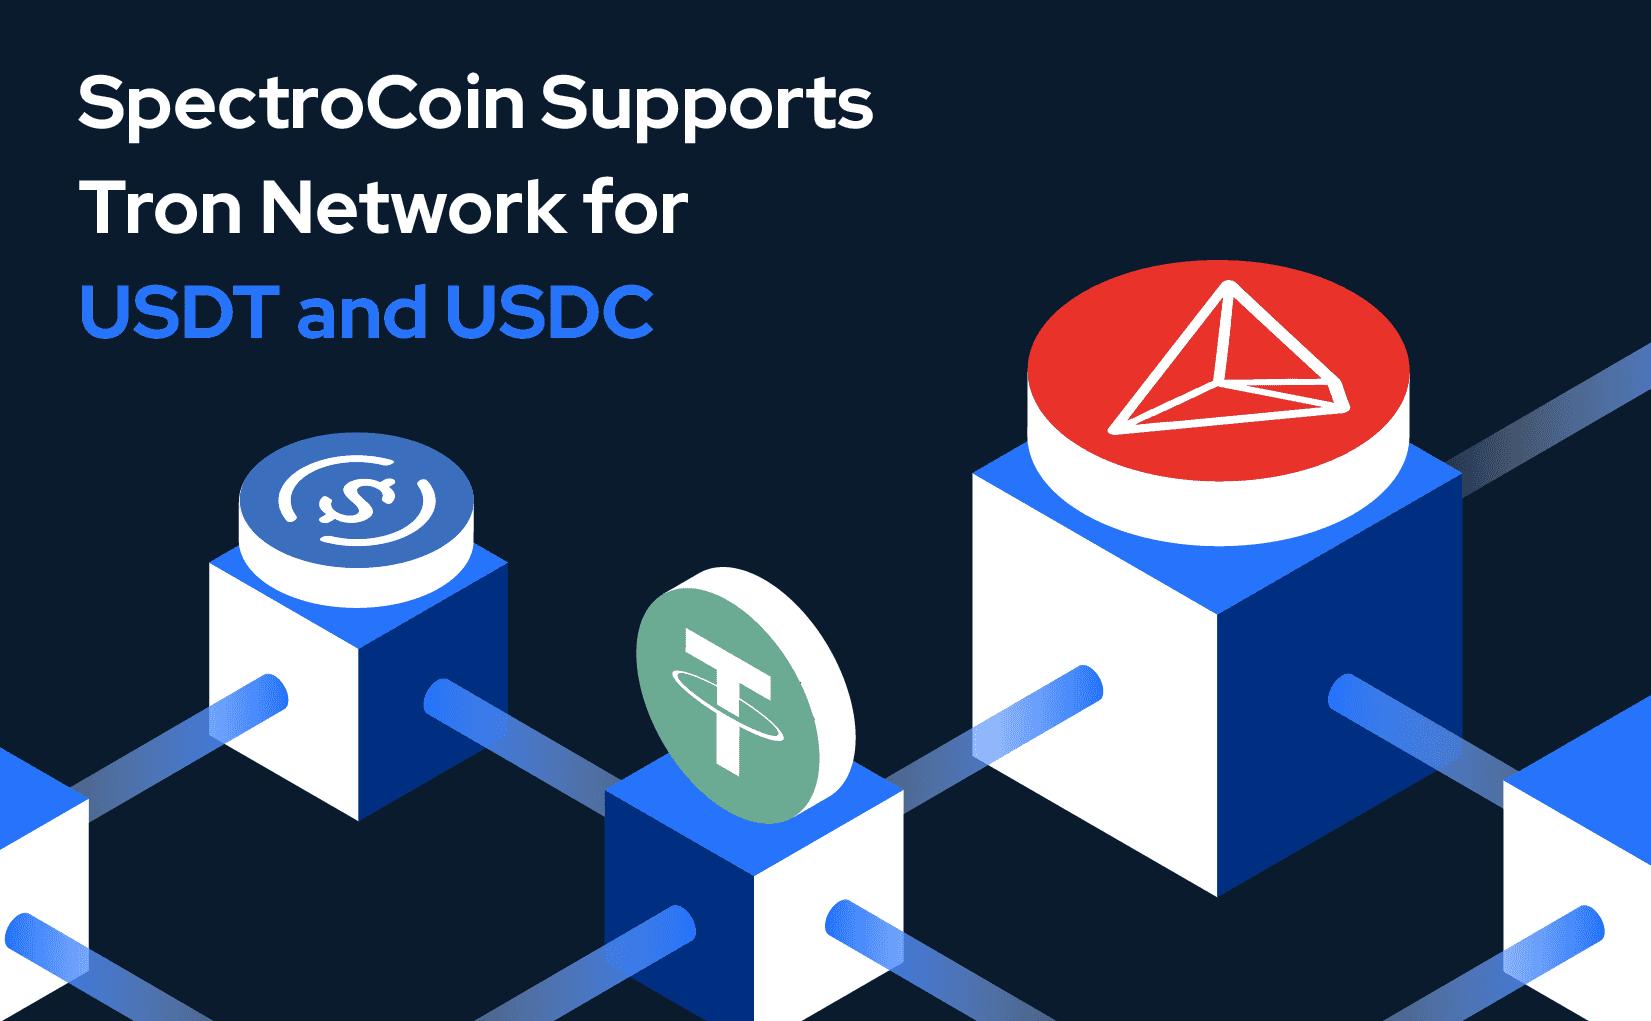 SpectroCoin Supports Tron Network for USDT and USDC